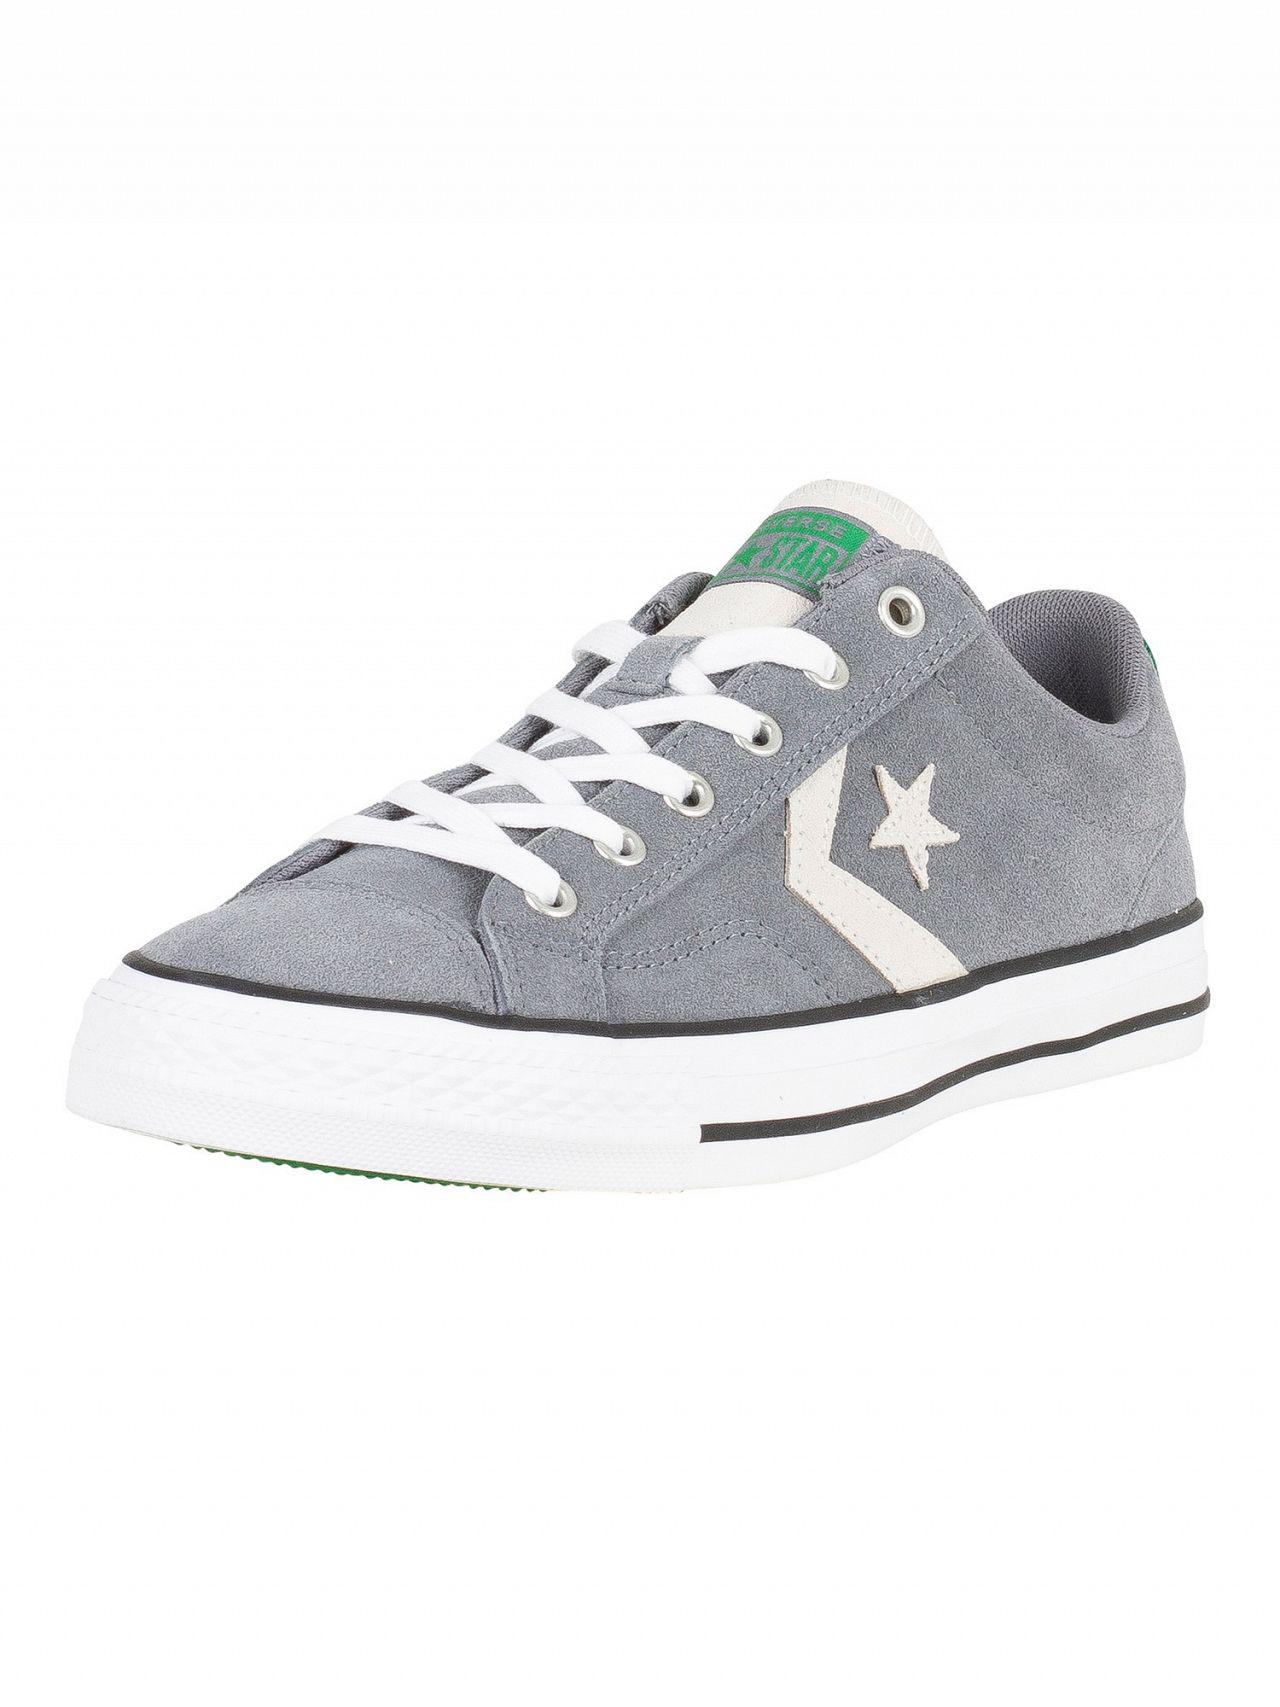 Converse Cool Grey/white Star Player Ox Suede Trainers in Gray for Men -  Lyst